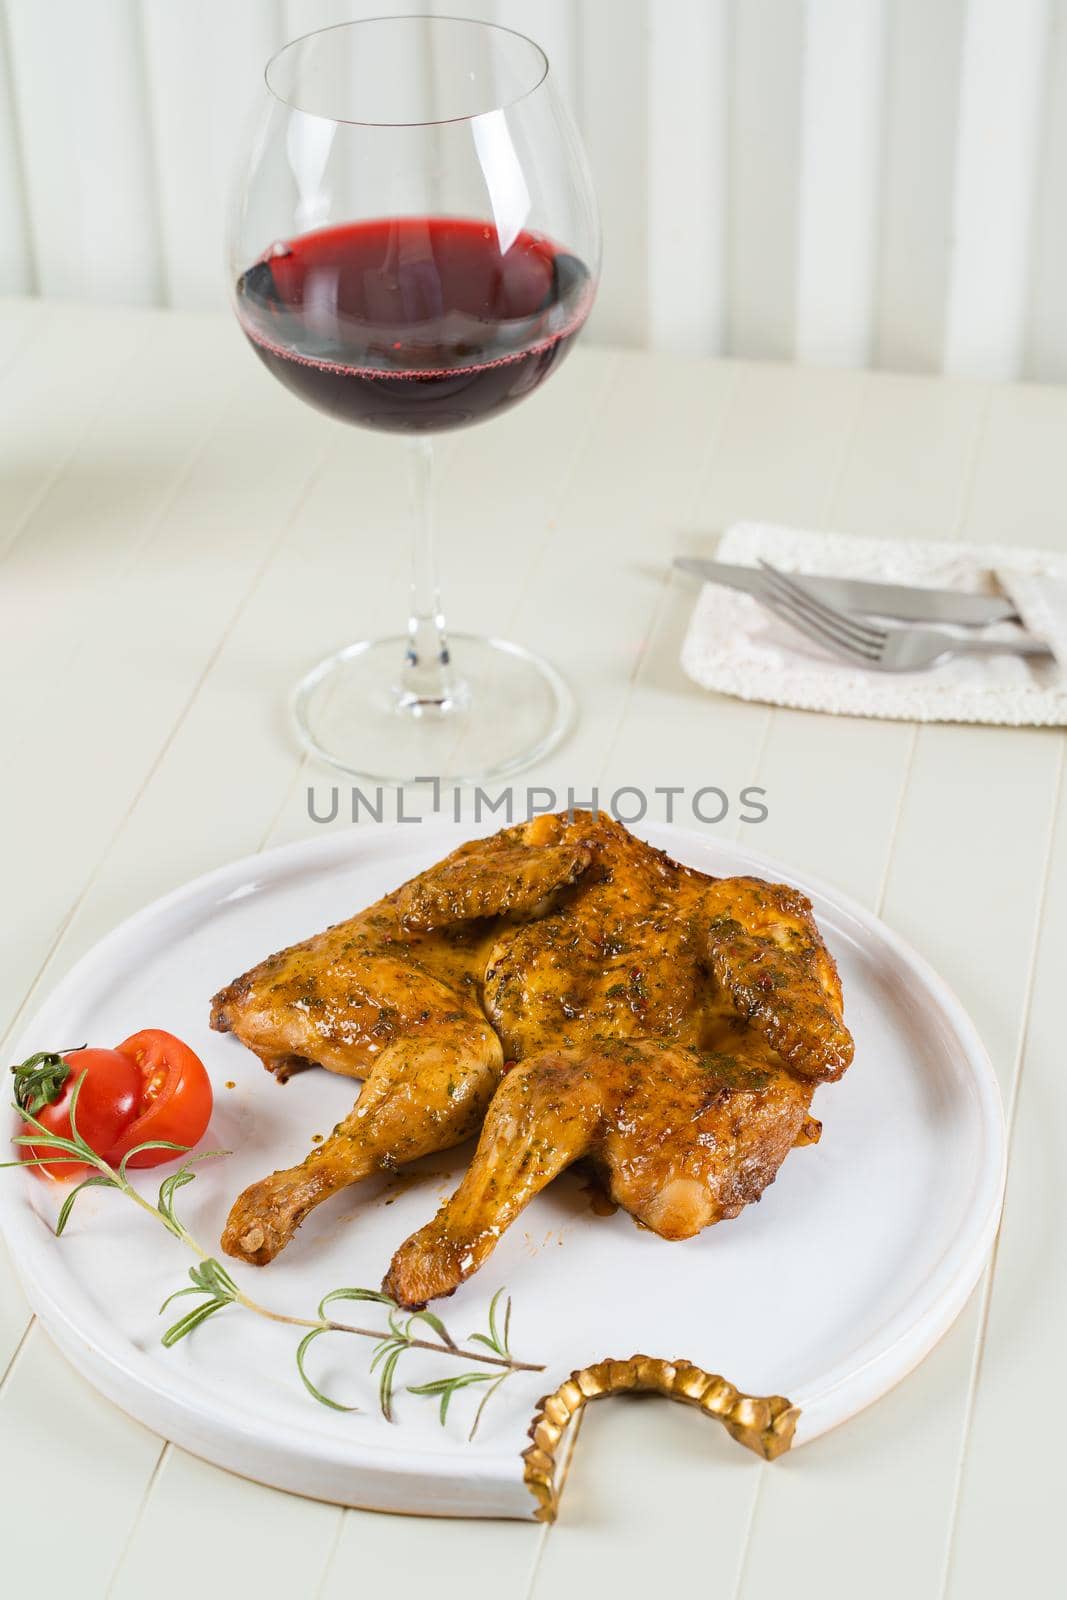 Tobacco chicken on a white plate with a glass of red wine, cutlery. Grilled chicken by Rabizo